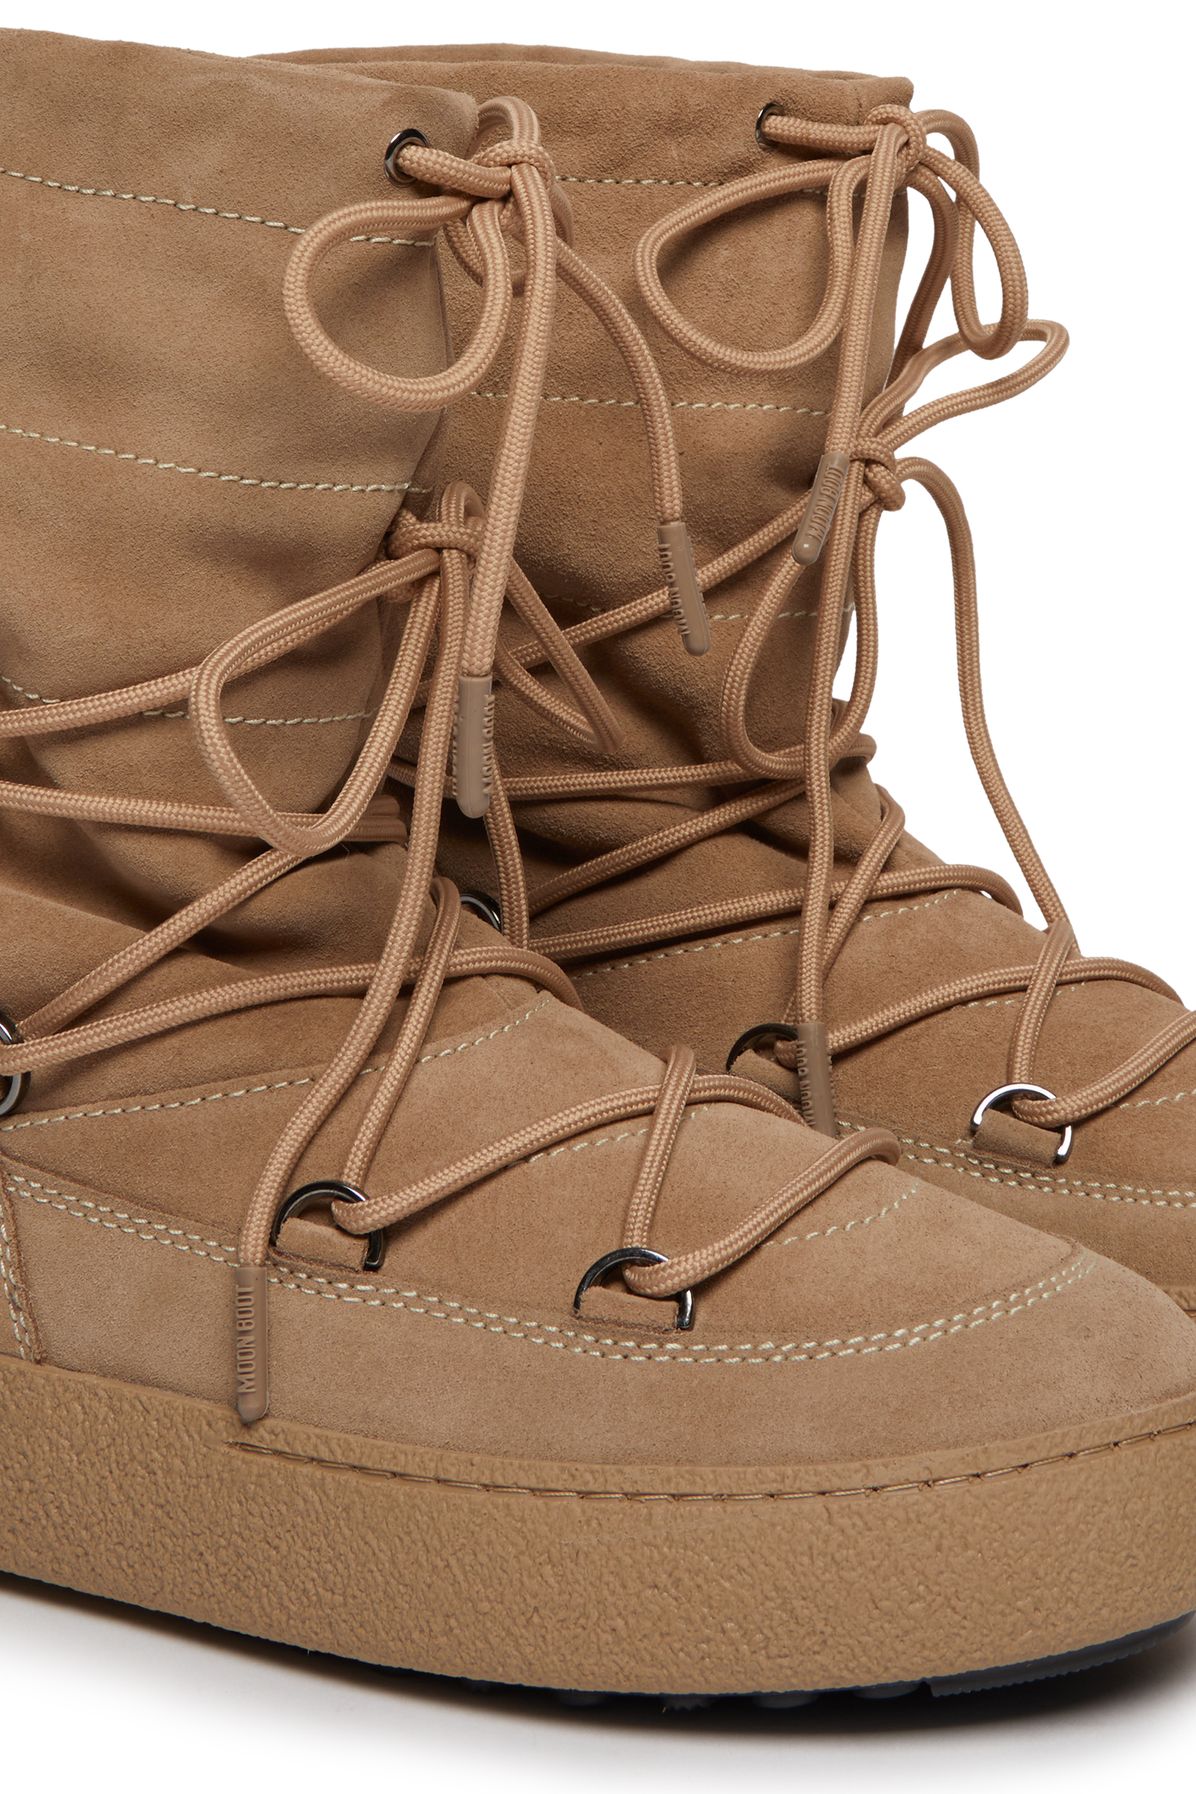 Moon Boot Boot ltrack suede